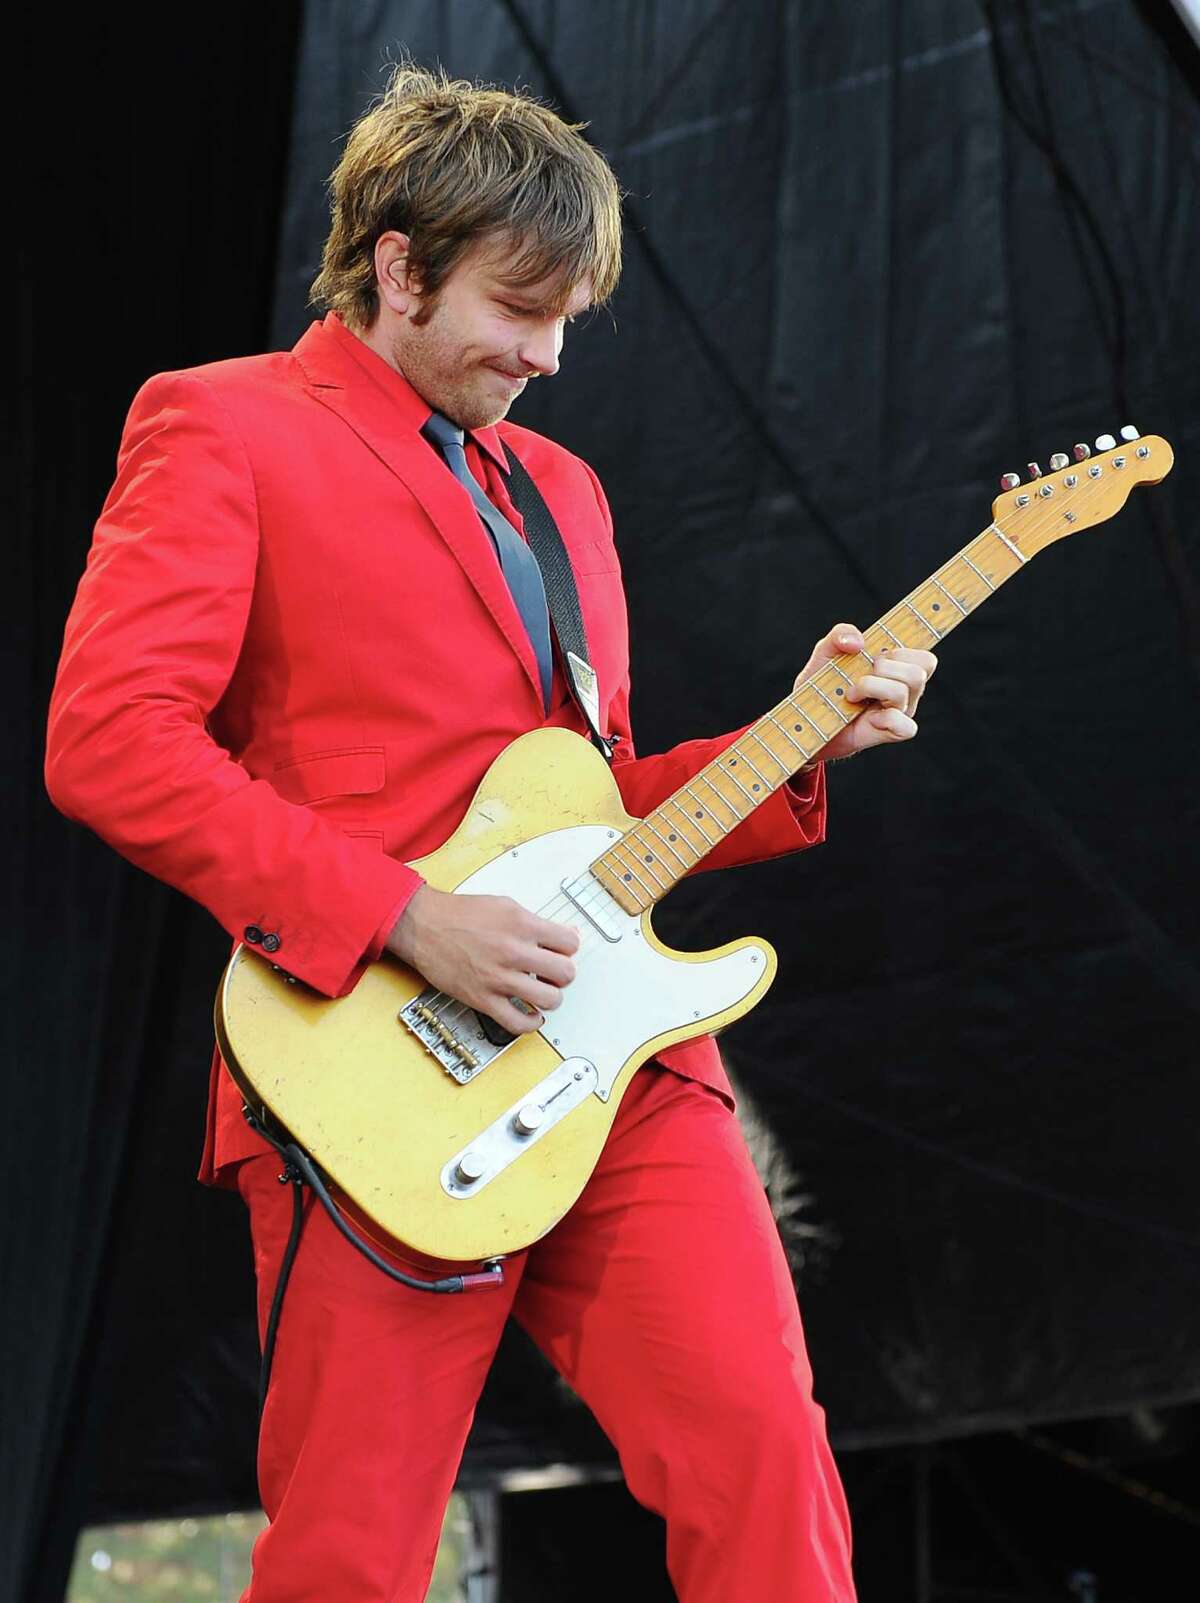 SAN FRANCISCO, CA - AUGUST 13: Andy Ross of OK GO performs on Day 2 of Outside Lands Music Festival at Golden Gate Park on August 13, 2011 in San Francisco, California. (Photo by Steve Jennings/WireImage)